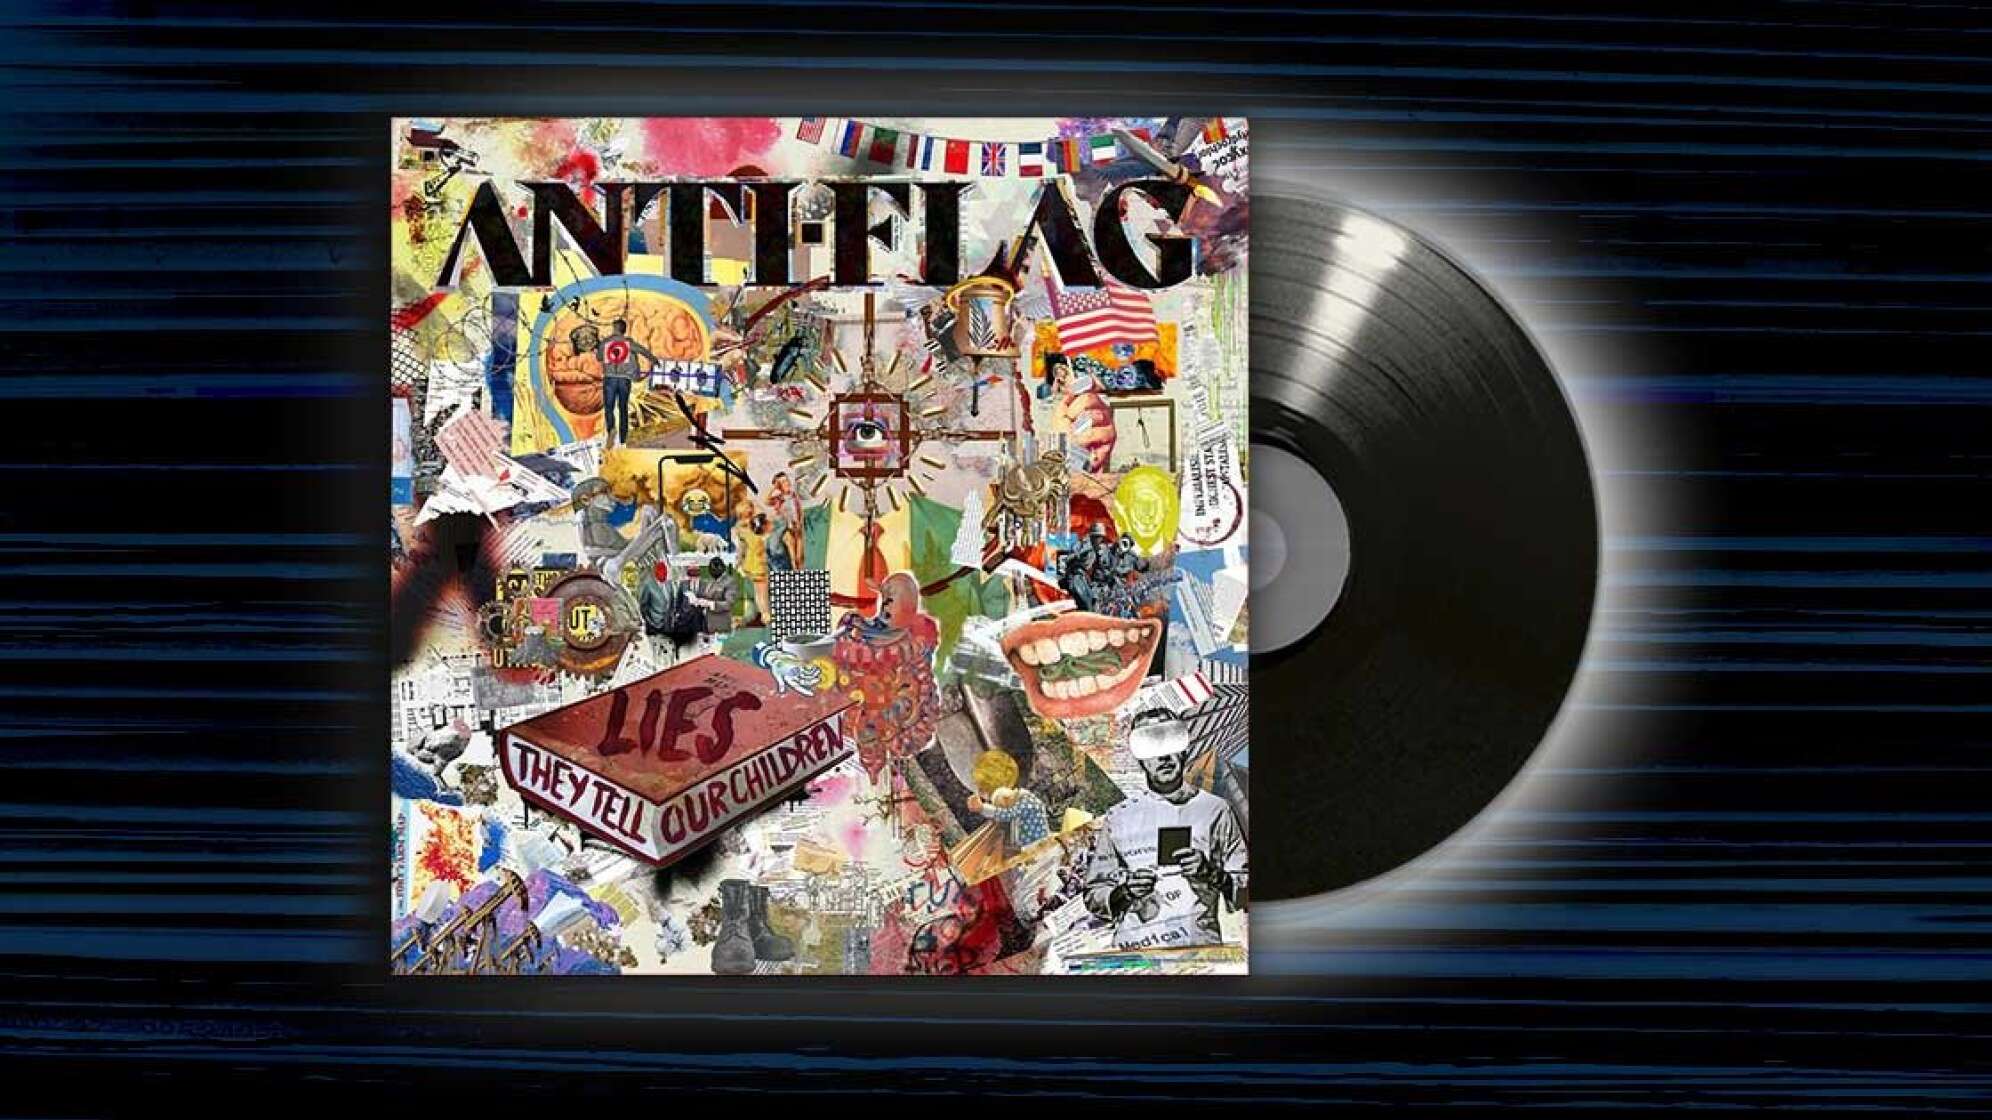 Album-Cover: Anti-Flag - Lies They Tell Our Children